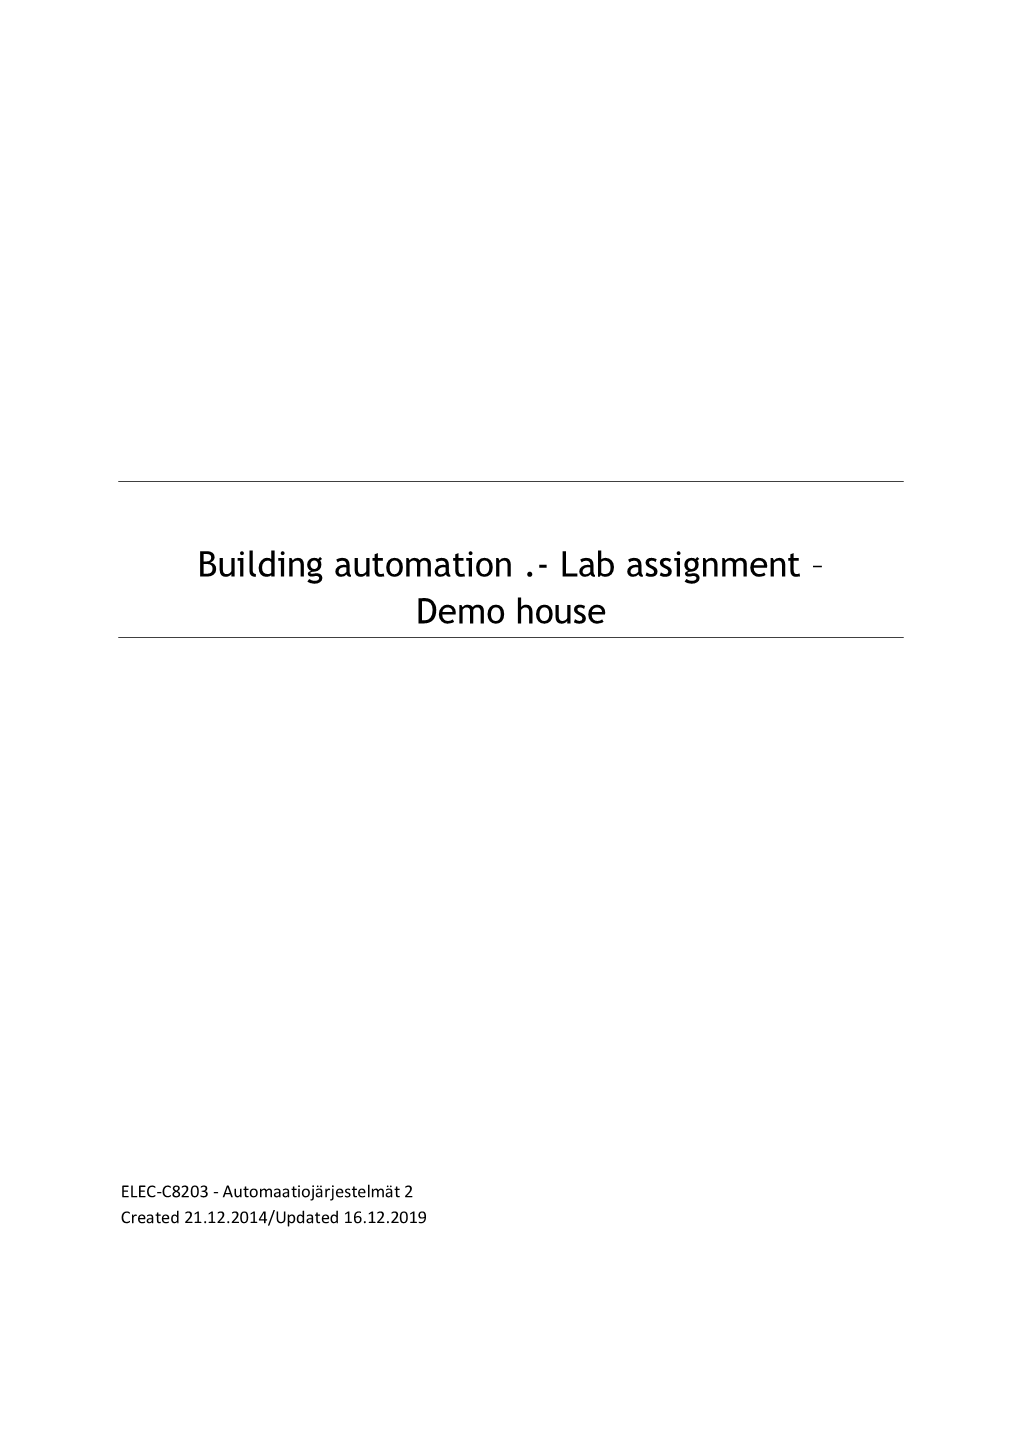 Building Automation .- Lab Assignment – Demo House